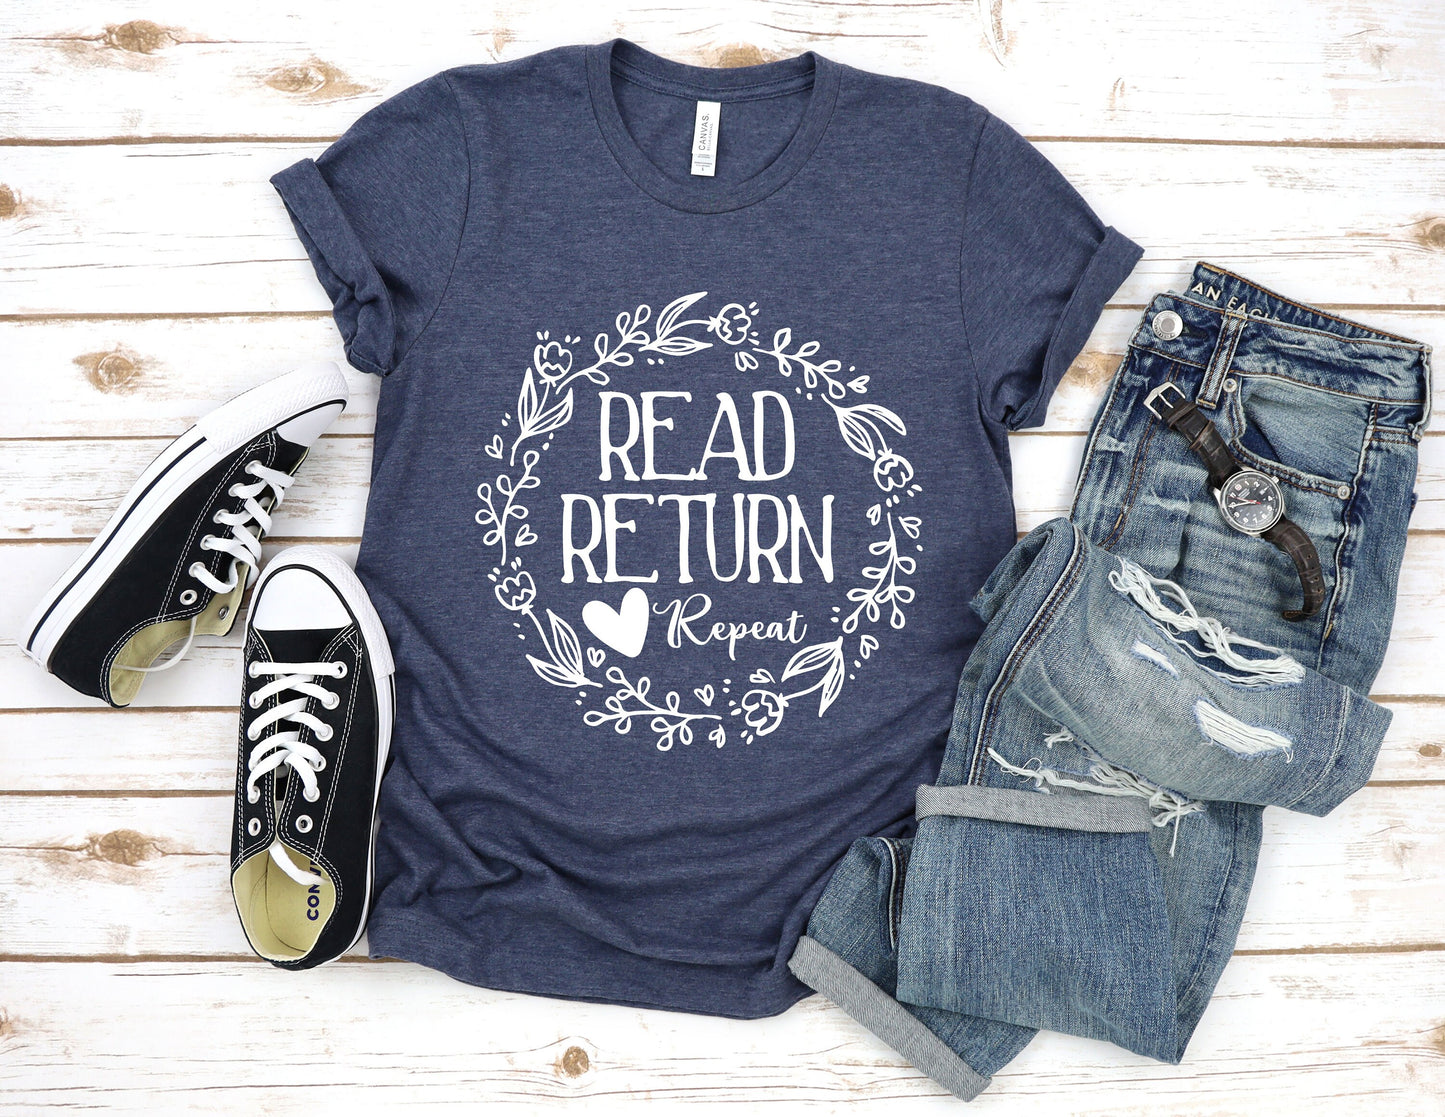 Read Return Repeat Book Nerd Librarian Book Lovers Reading Style Ultra Soft Graphic Tee Unisex Soft Tee T-shirt for Women or Men